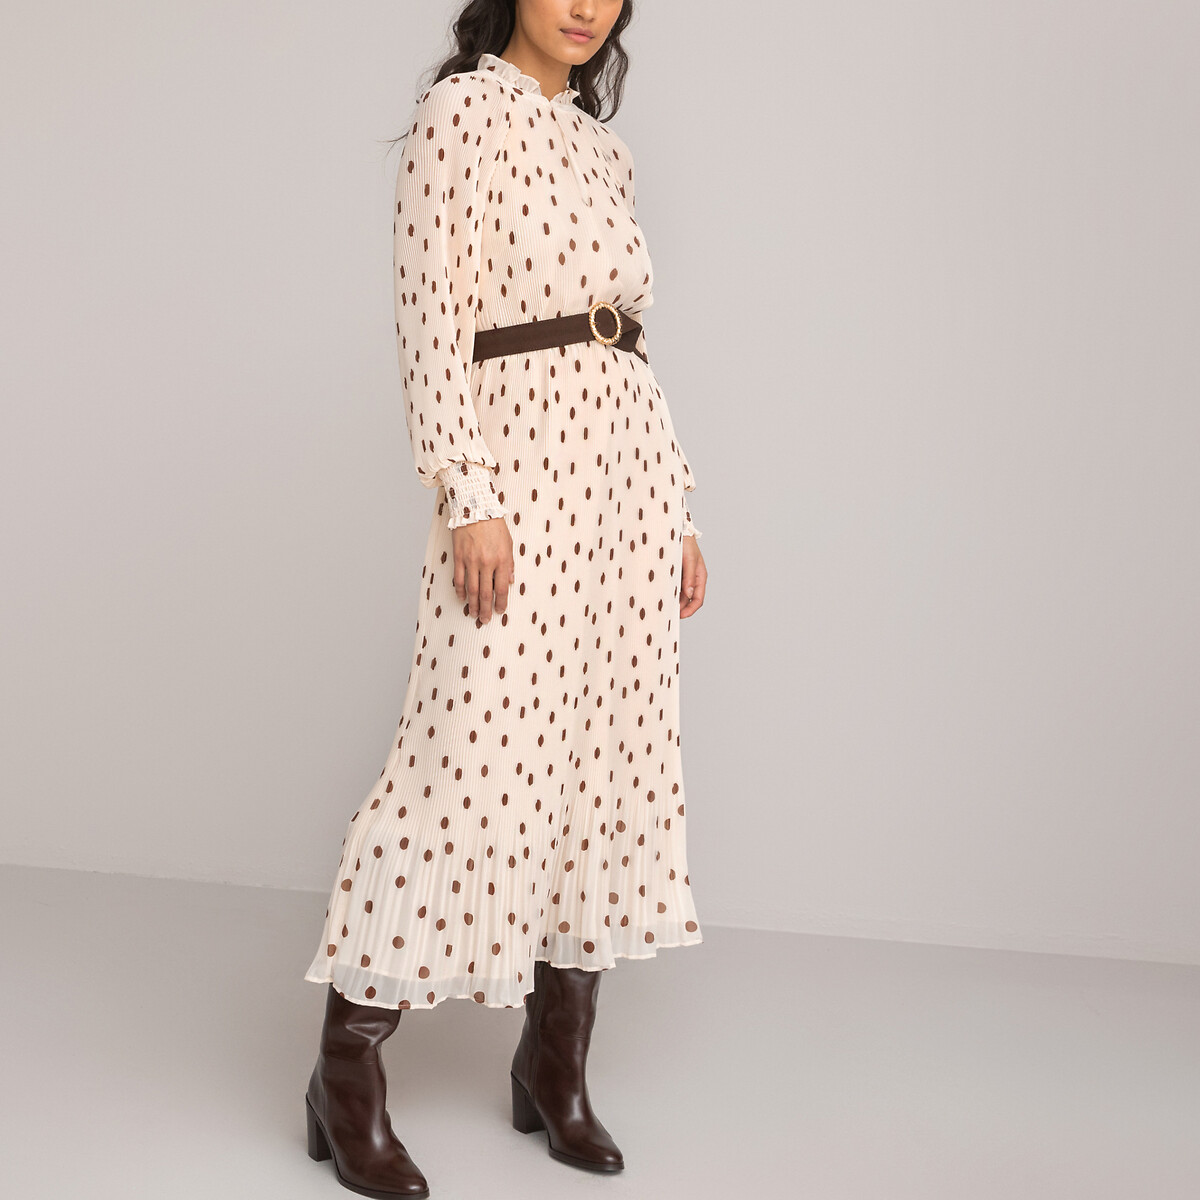 Pleated Midaxi Dress in Polka Dot Print with Ruffled Neck